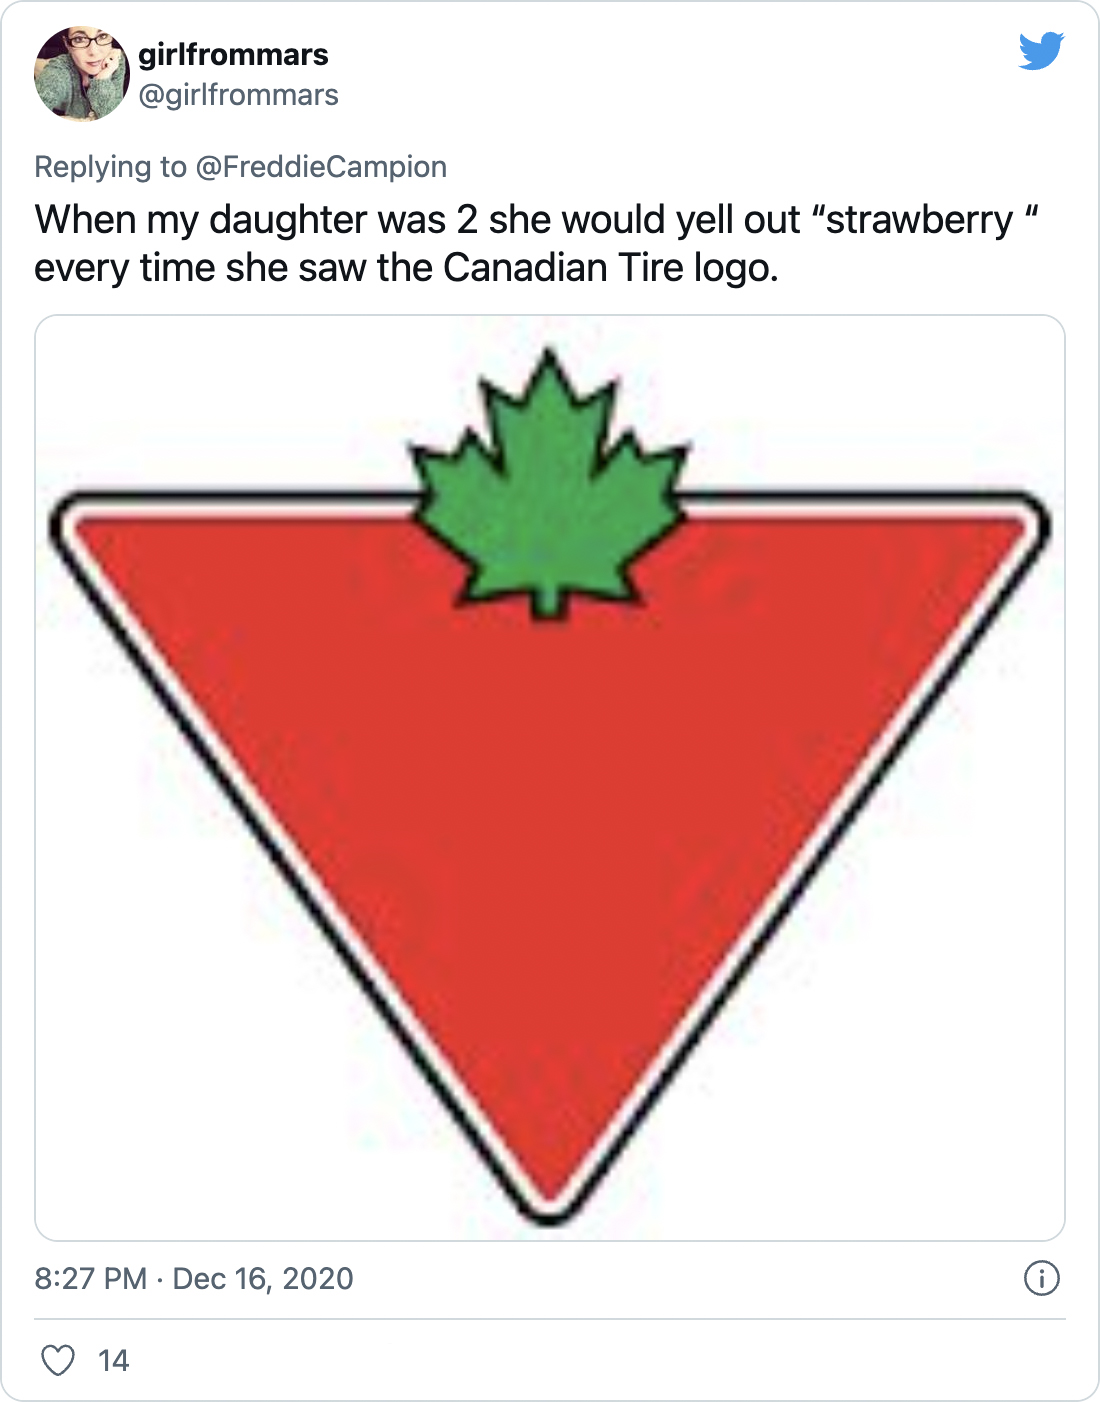 When my daughter was 2 she would yell out “strawberry “ every time she saw the Canadian Tire logo. - @girlfrommars